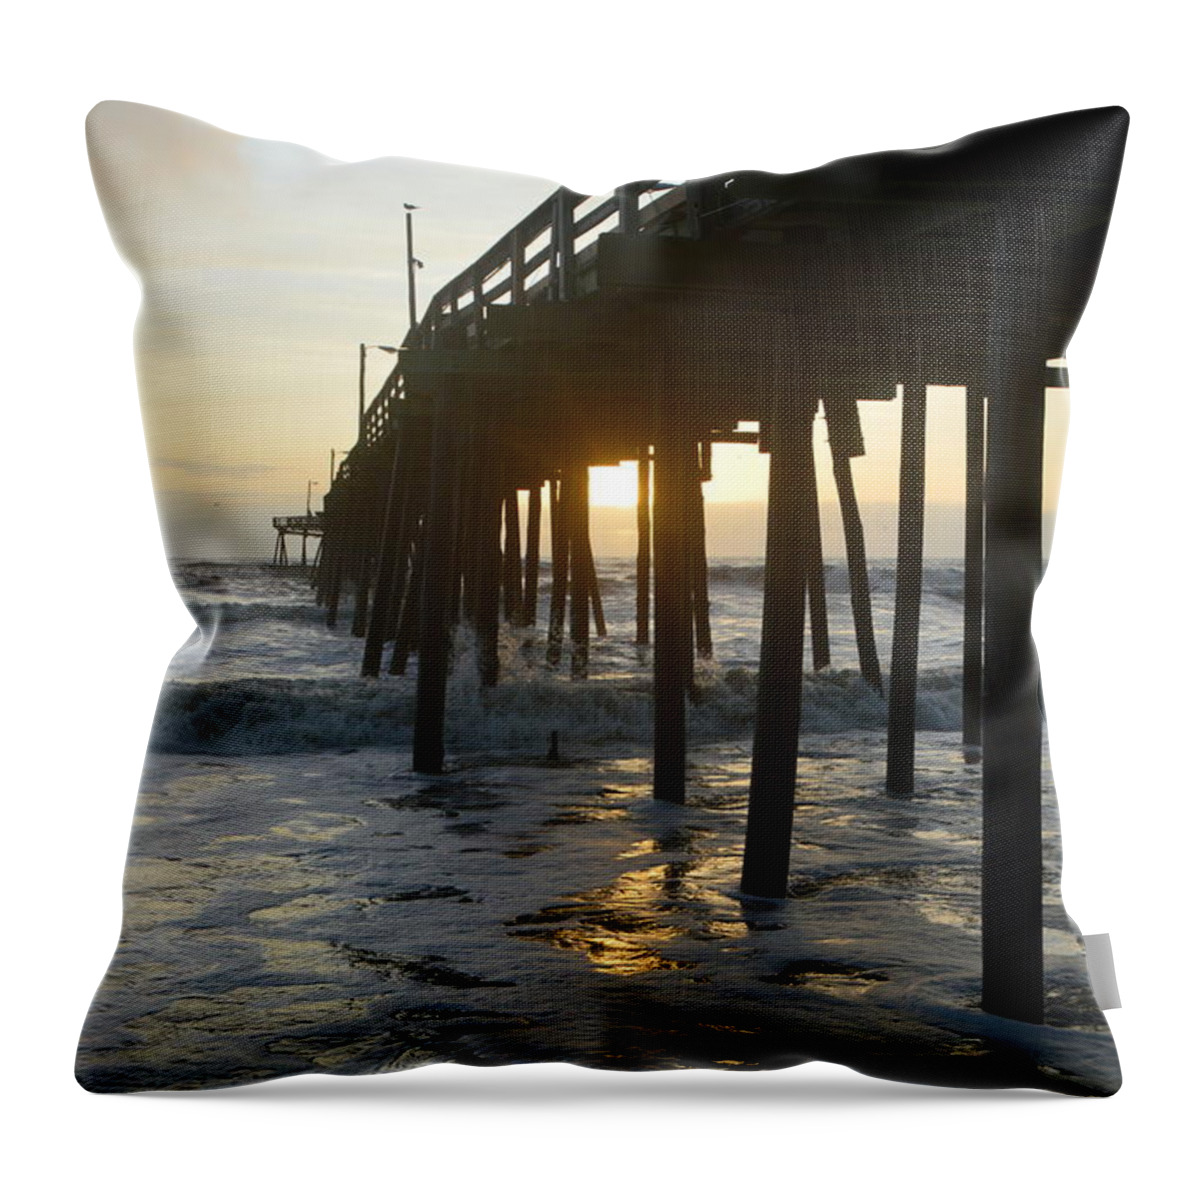 Obx Sunrise Throw Pillow featuring the photograph Under the Pier 8/27 by Barbara Ann Bell